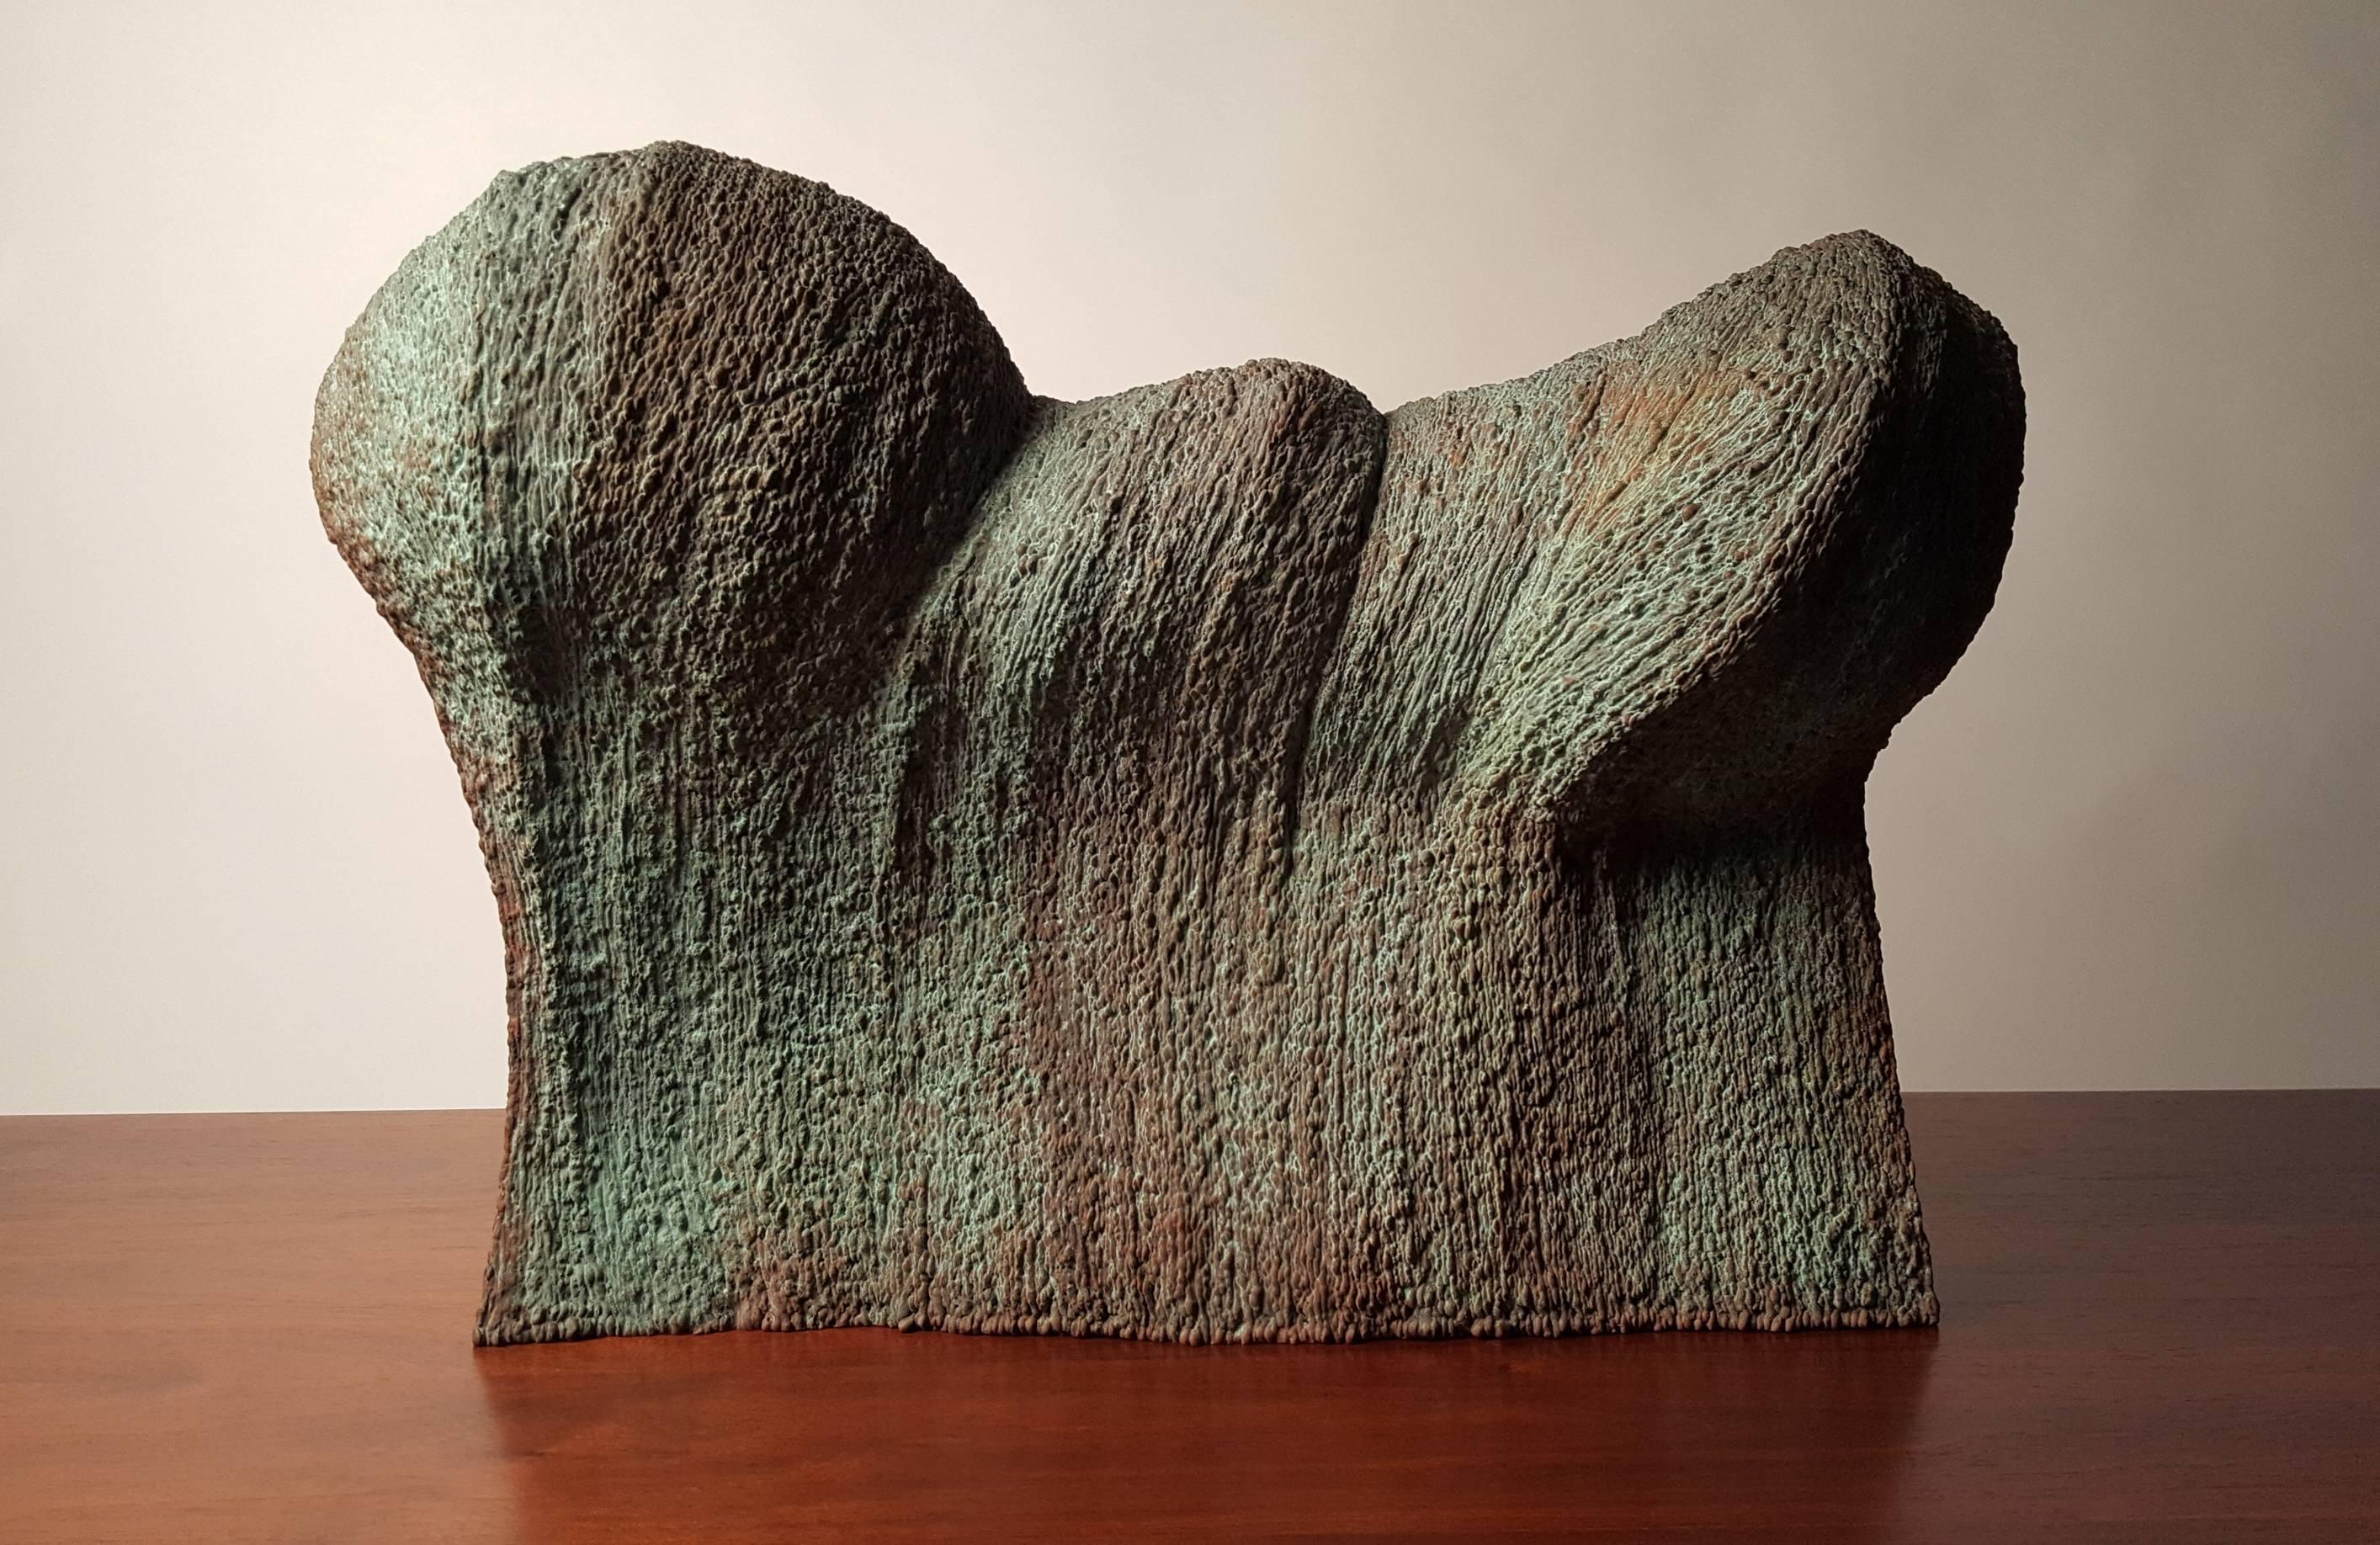 20c design is proud to represent this phenomenal abstract waveform sculpture created by contemporary artist Douglas Ihlenfeld. It is crafted from hand-welded bronze with an applied verdigris patina. This sculpture represents a tremendous amount of